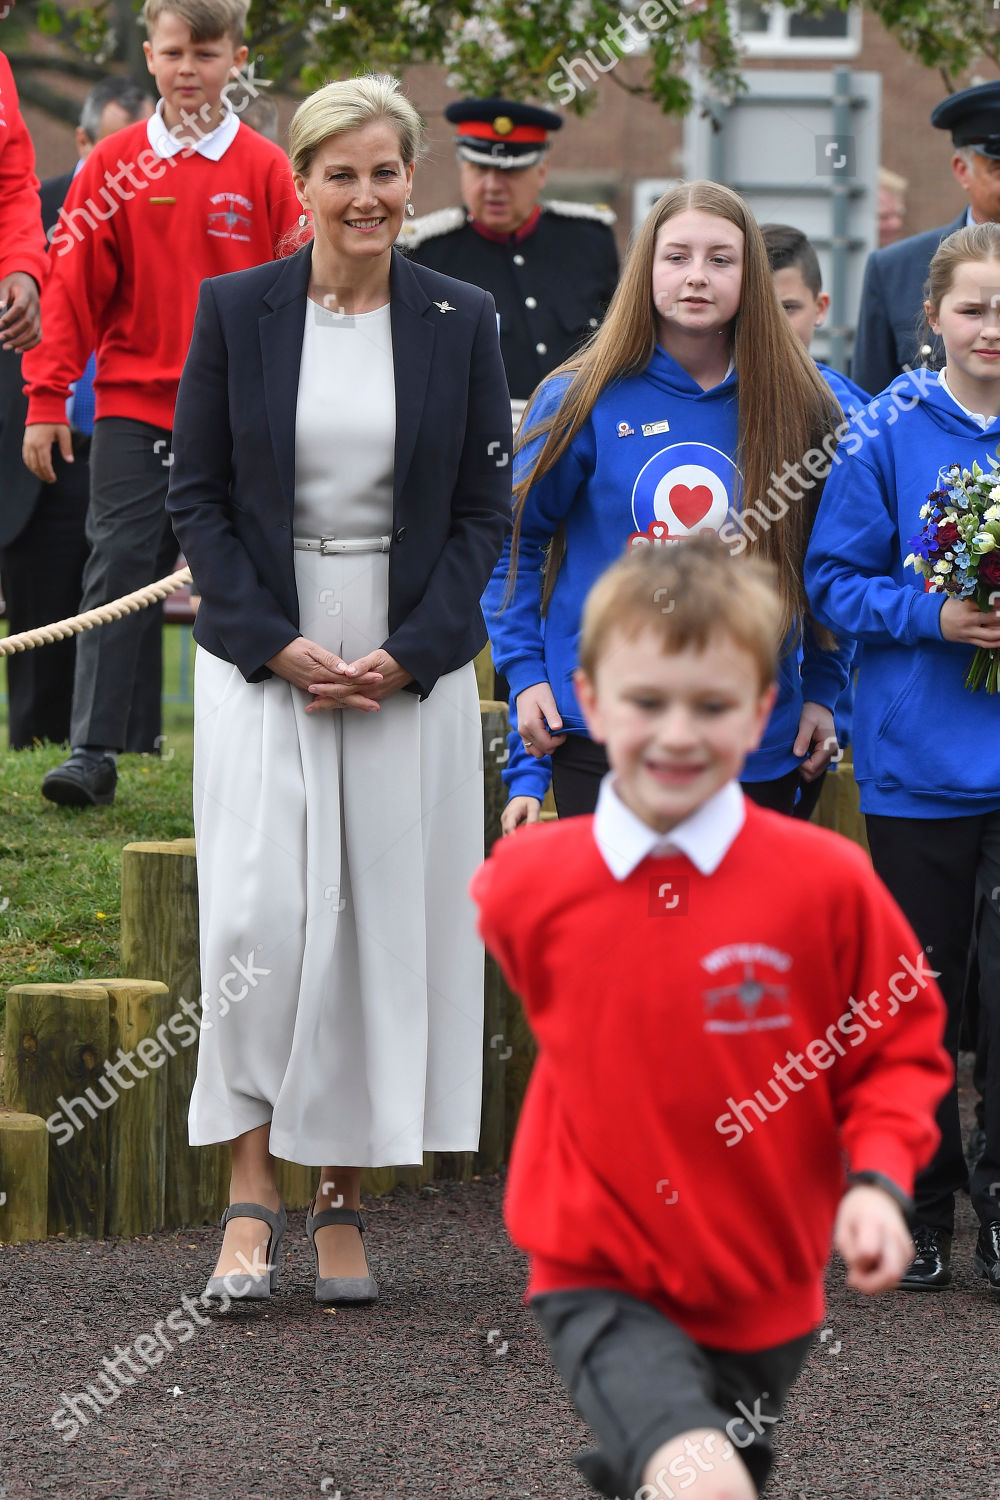 sophie-countess-of-wessex-opens-airplay-play-park-wittering-village-peterborough-uk-shutterstock-editorial-10217568ap.jpg